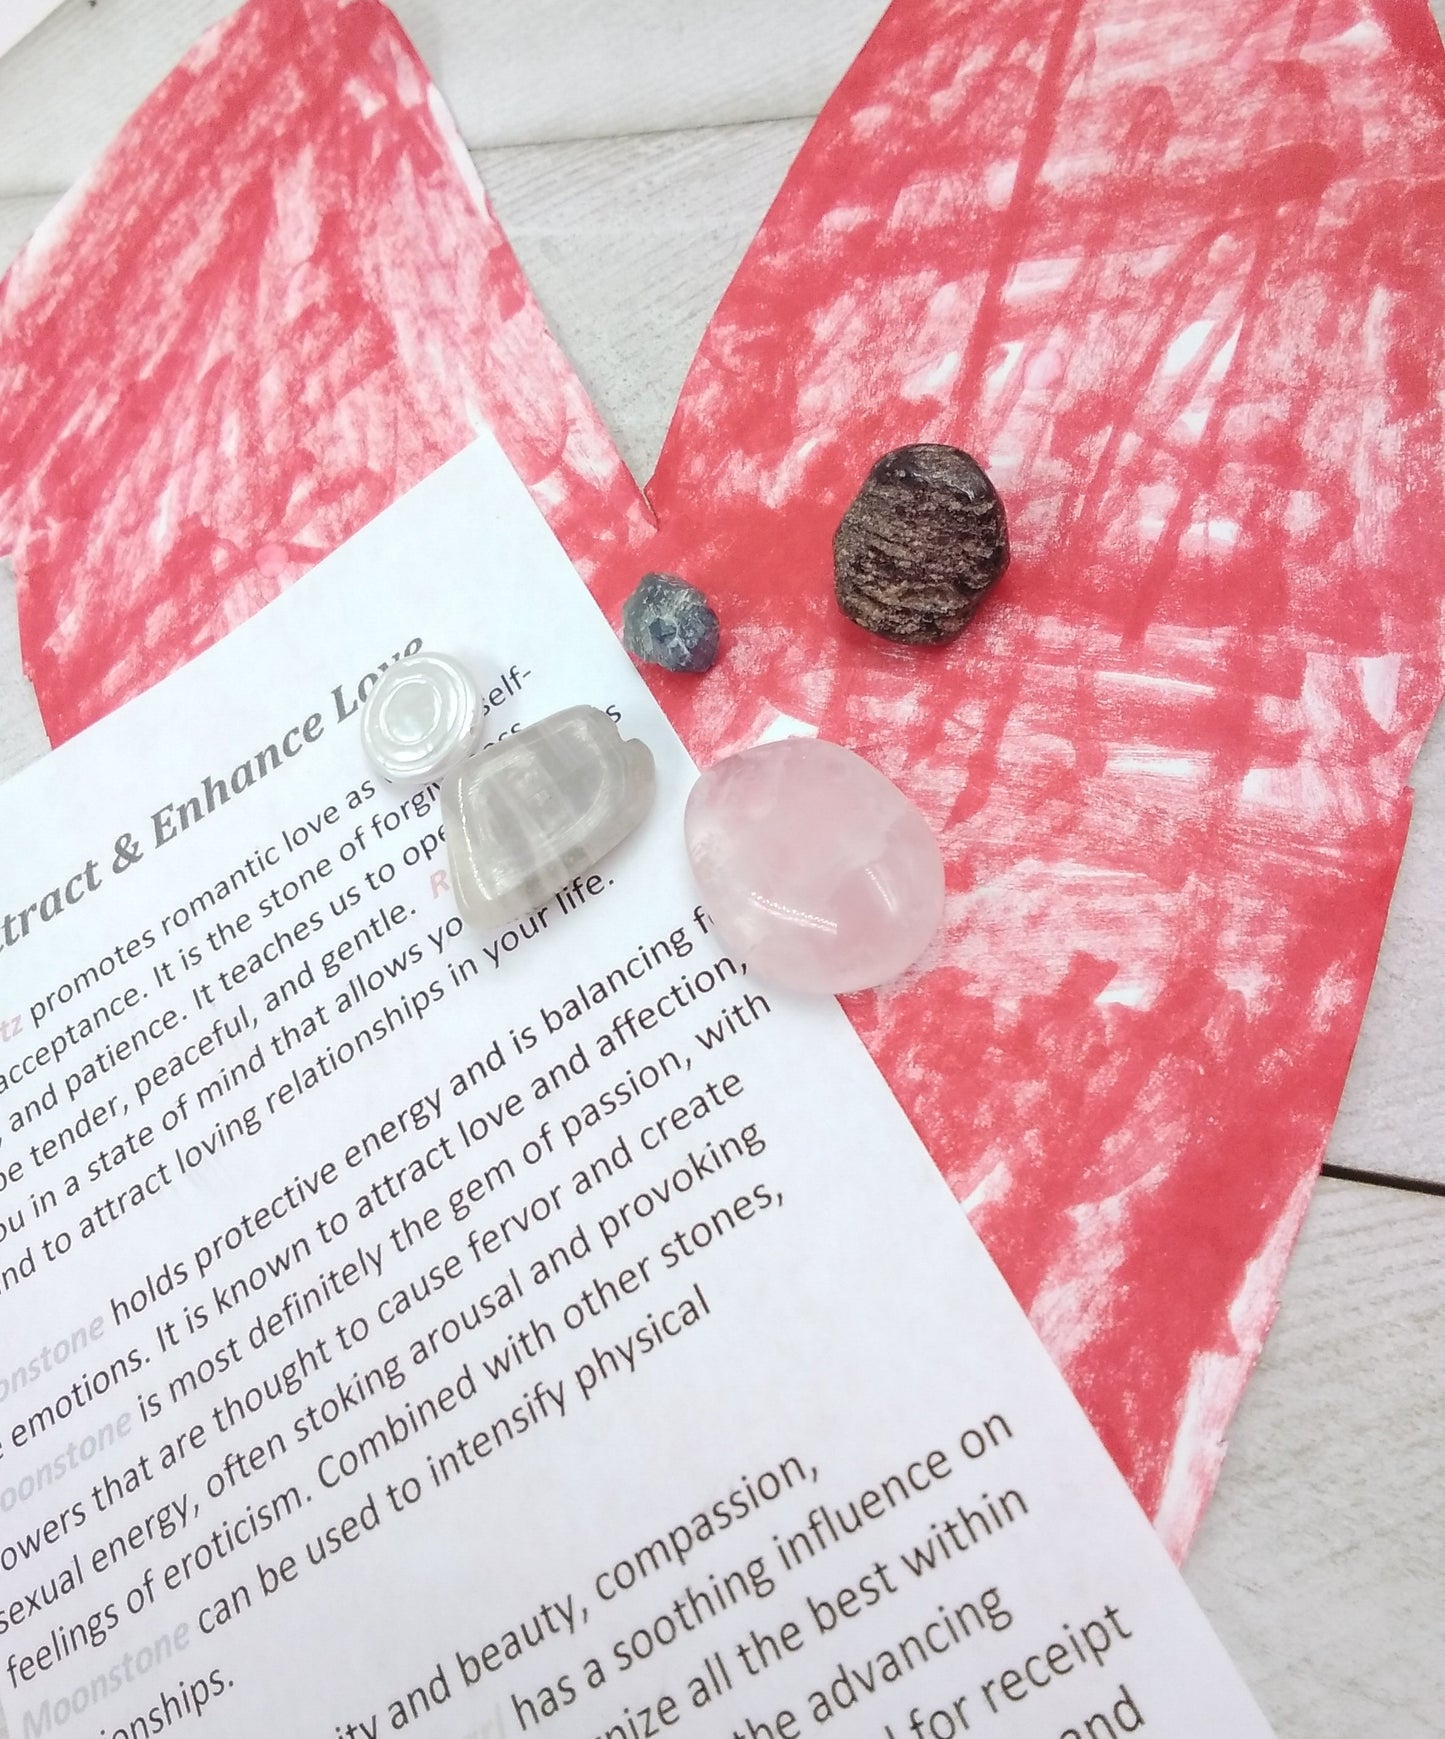 Attract Love Crystal Kit - Intentional Gifting for Heartfelt Connections